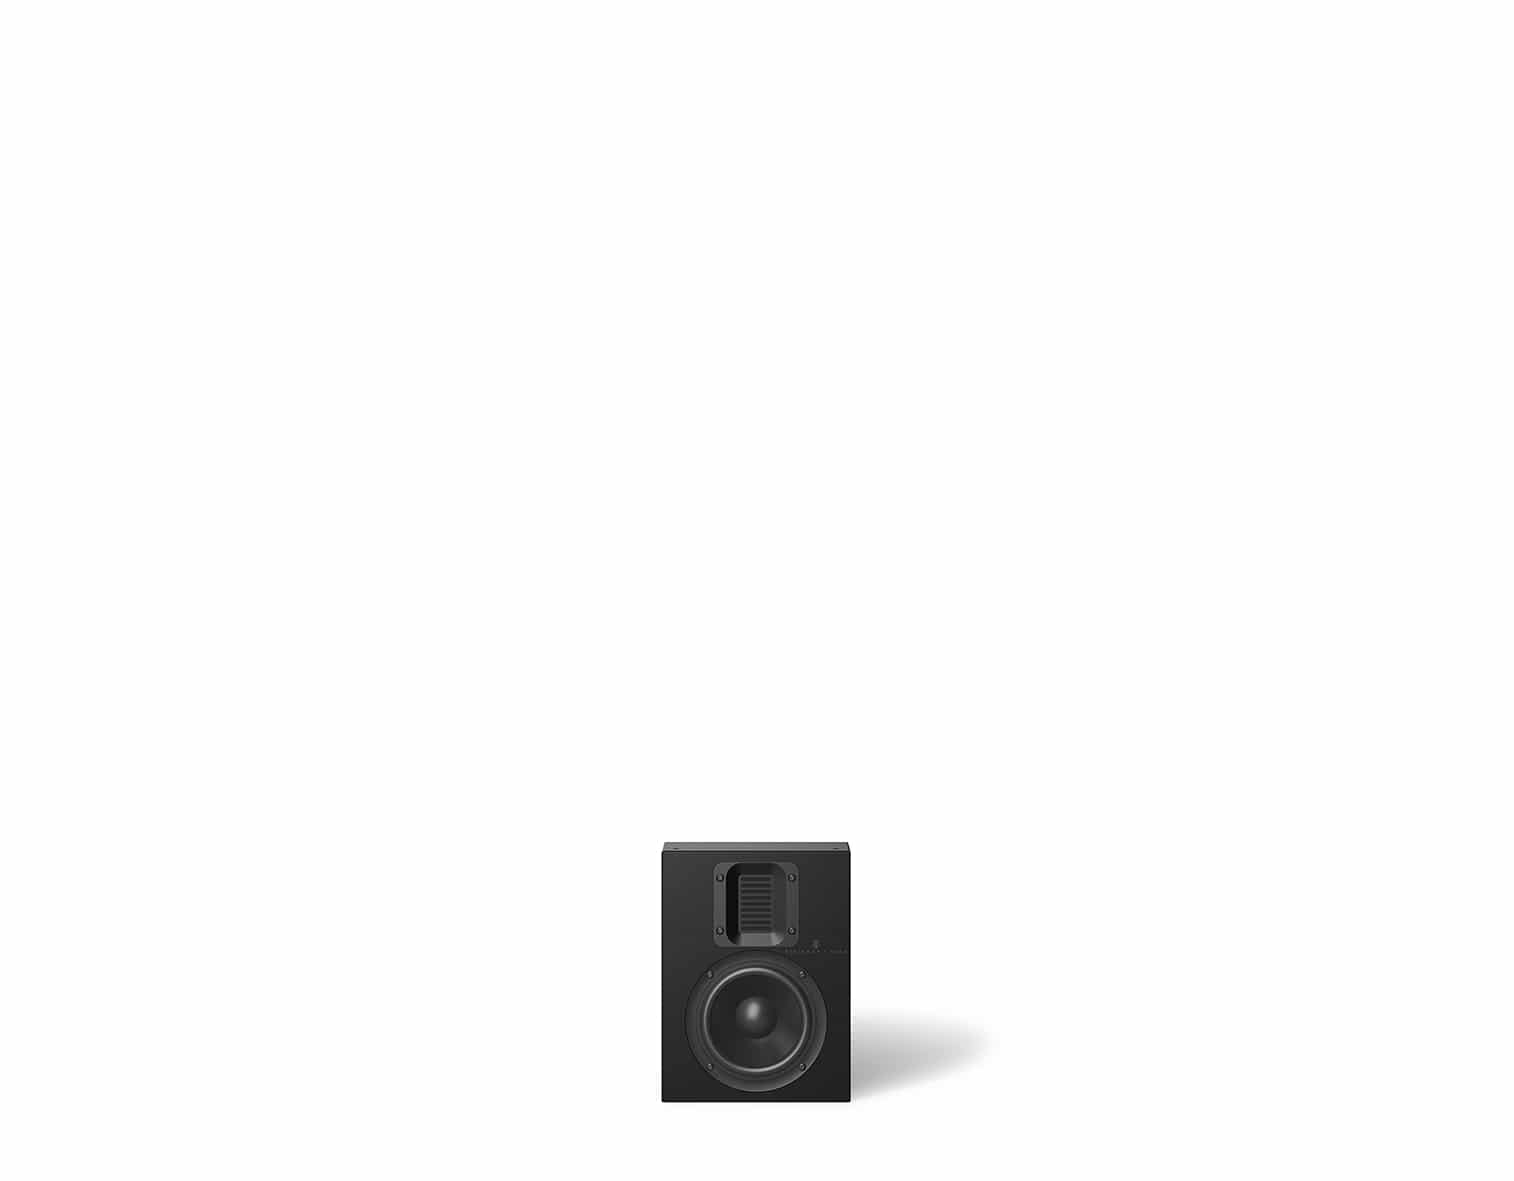 STEINWAY & SONS IW-15 Our smallest high-performance in-wall speaker